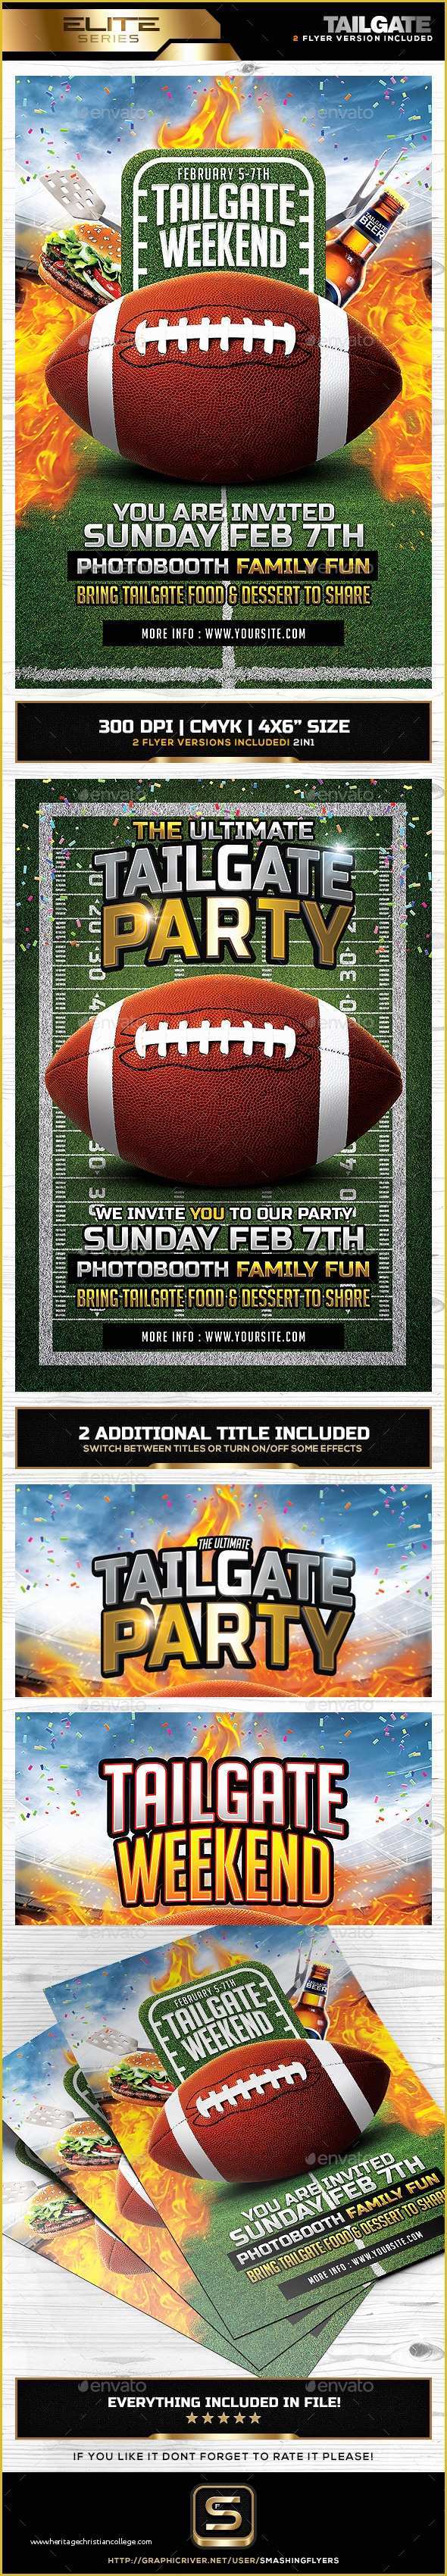 Free Tailgate Party Flyer Template Of Tailgate Party Flyer Template by Smashingflyers